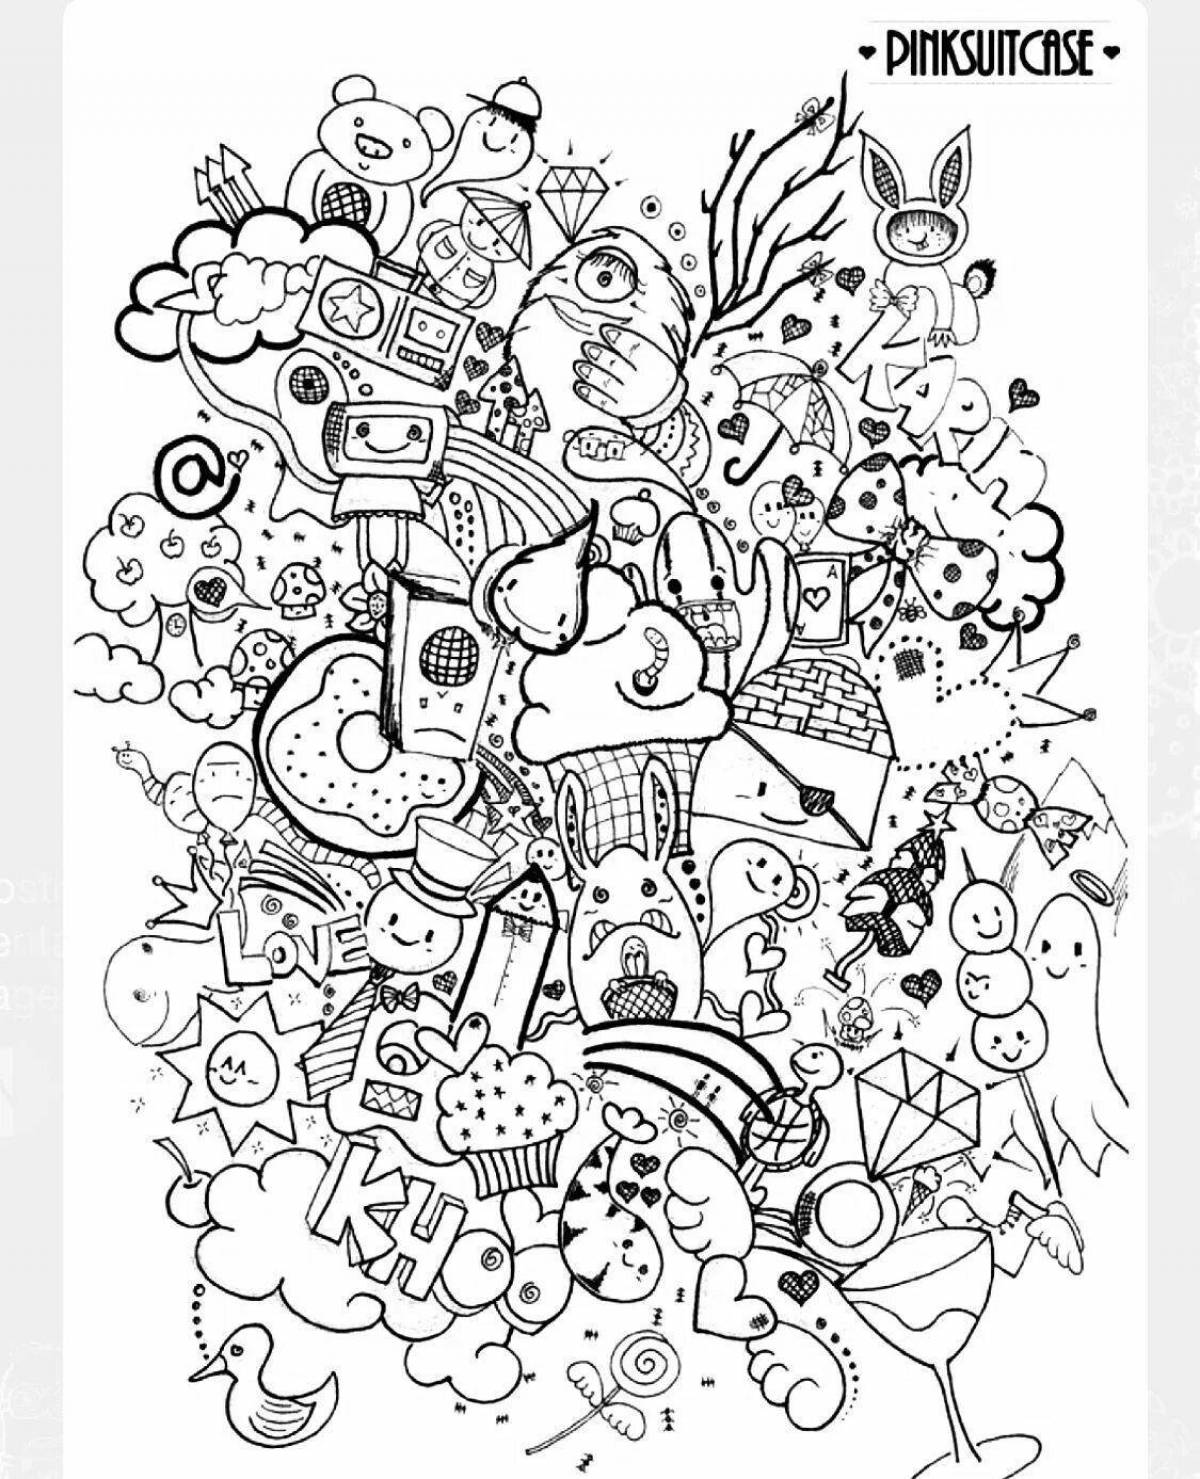 Relaxing anti-stress coloring book for markers